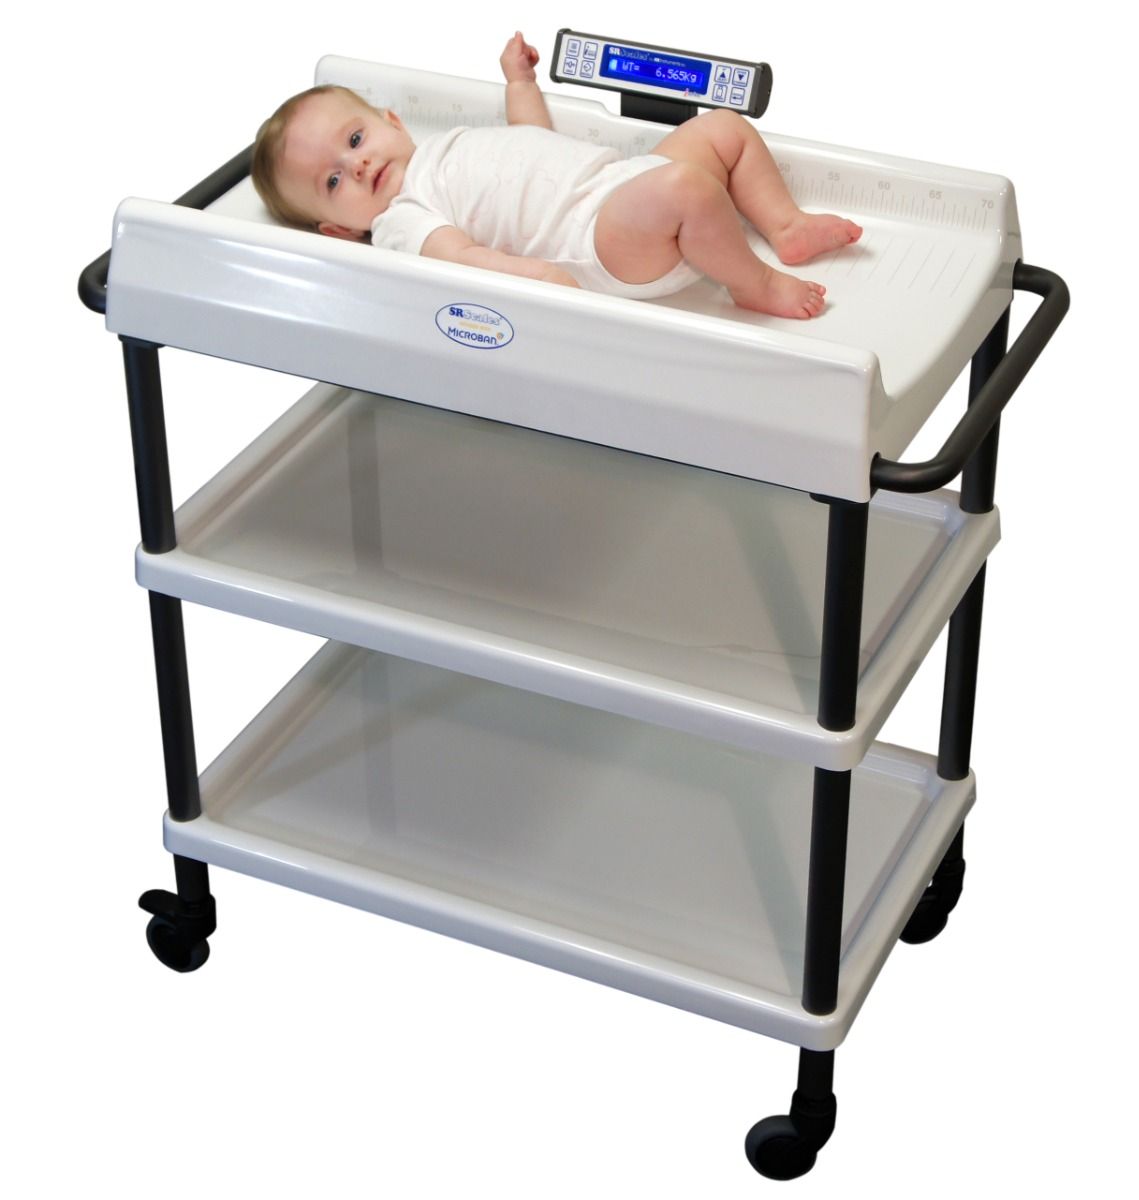 https://media.cmecorp.com/catalog/product/cache/5cb210a3a6c58f3682339fdba05c5652/s/r/sr_scales_sr635i_pediatric_scale_with_integrated_cart.jpg